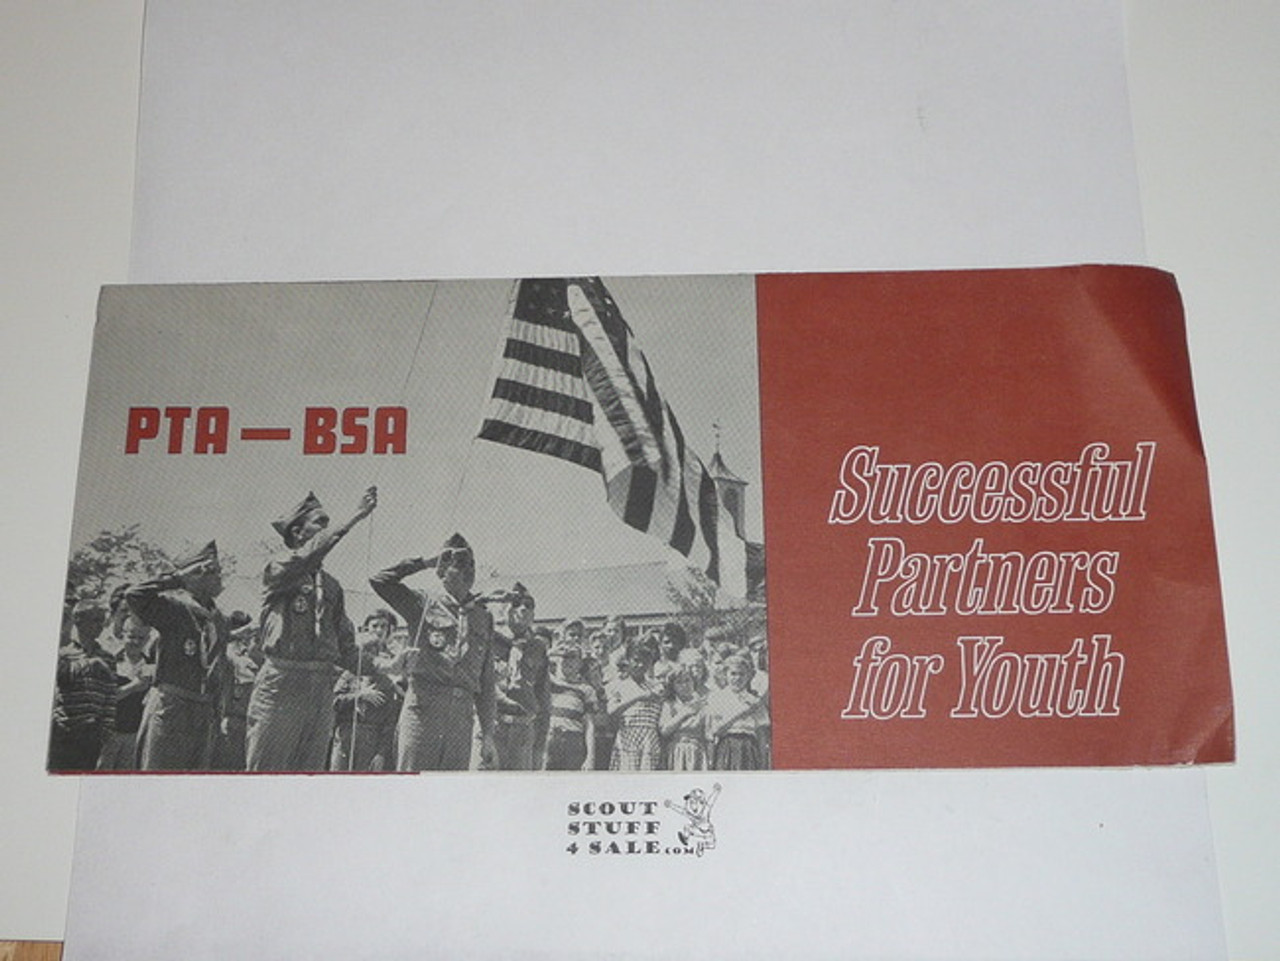 1964 PTA - BSA Successful Partners for Youth Brochure